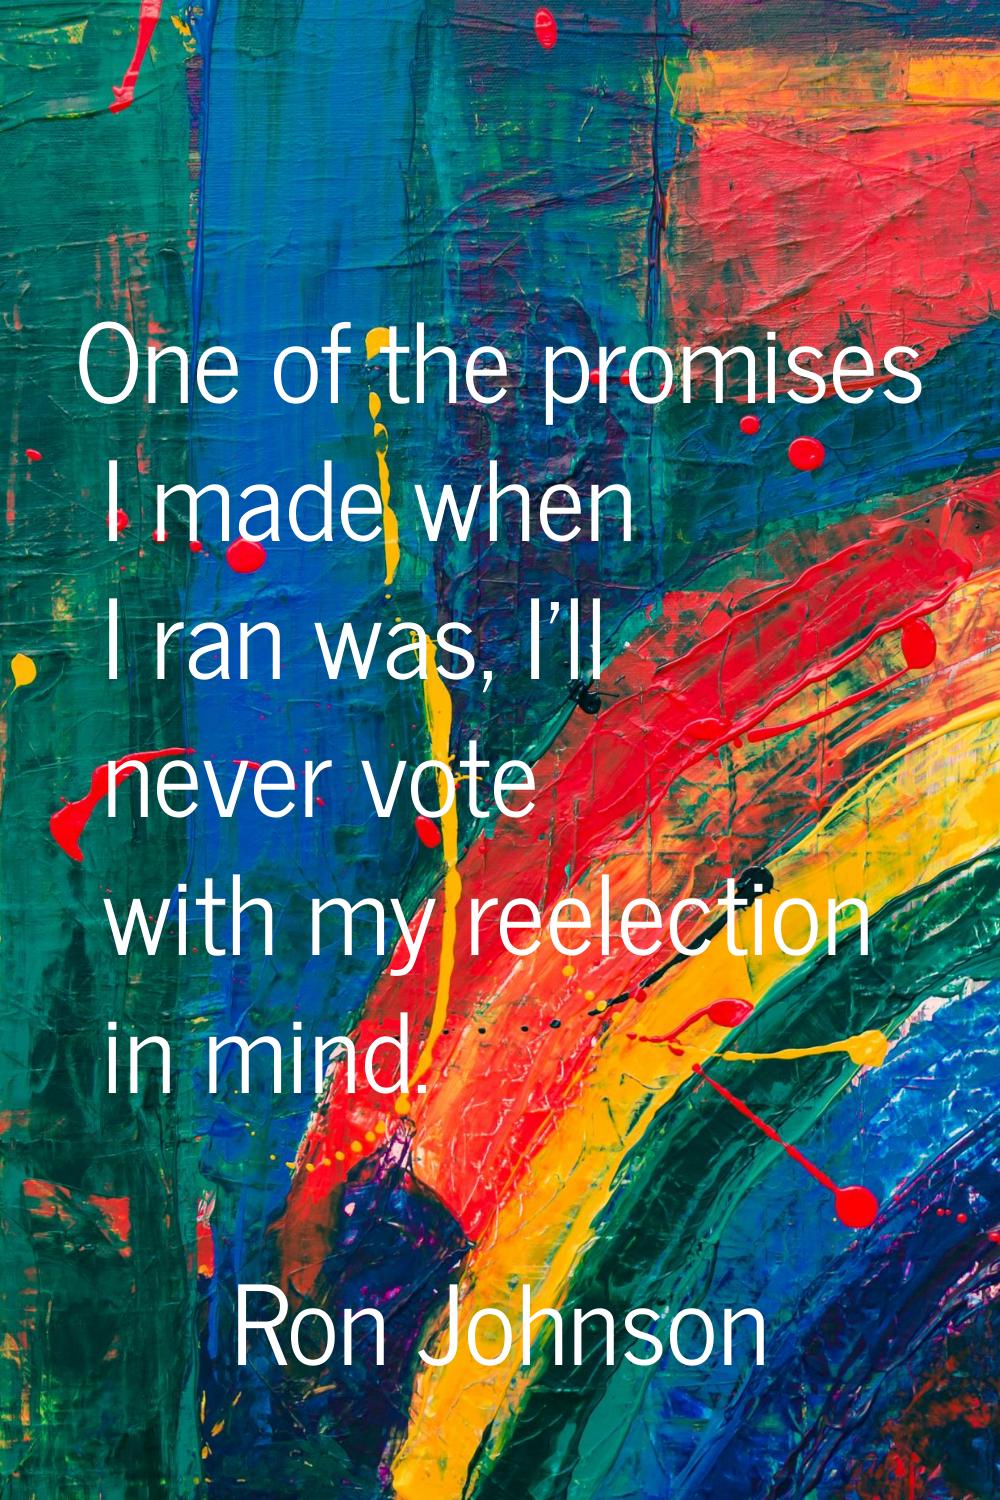 One of the promises I made when I ran was, I'll never vote with my reelection in mind.